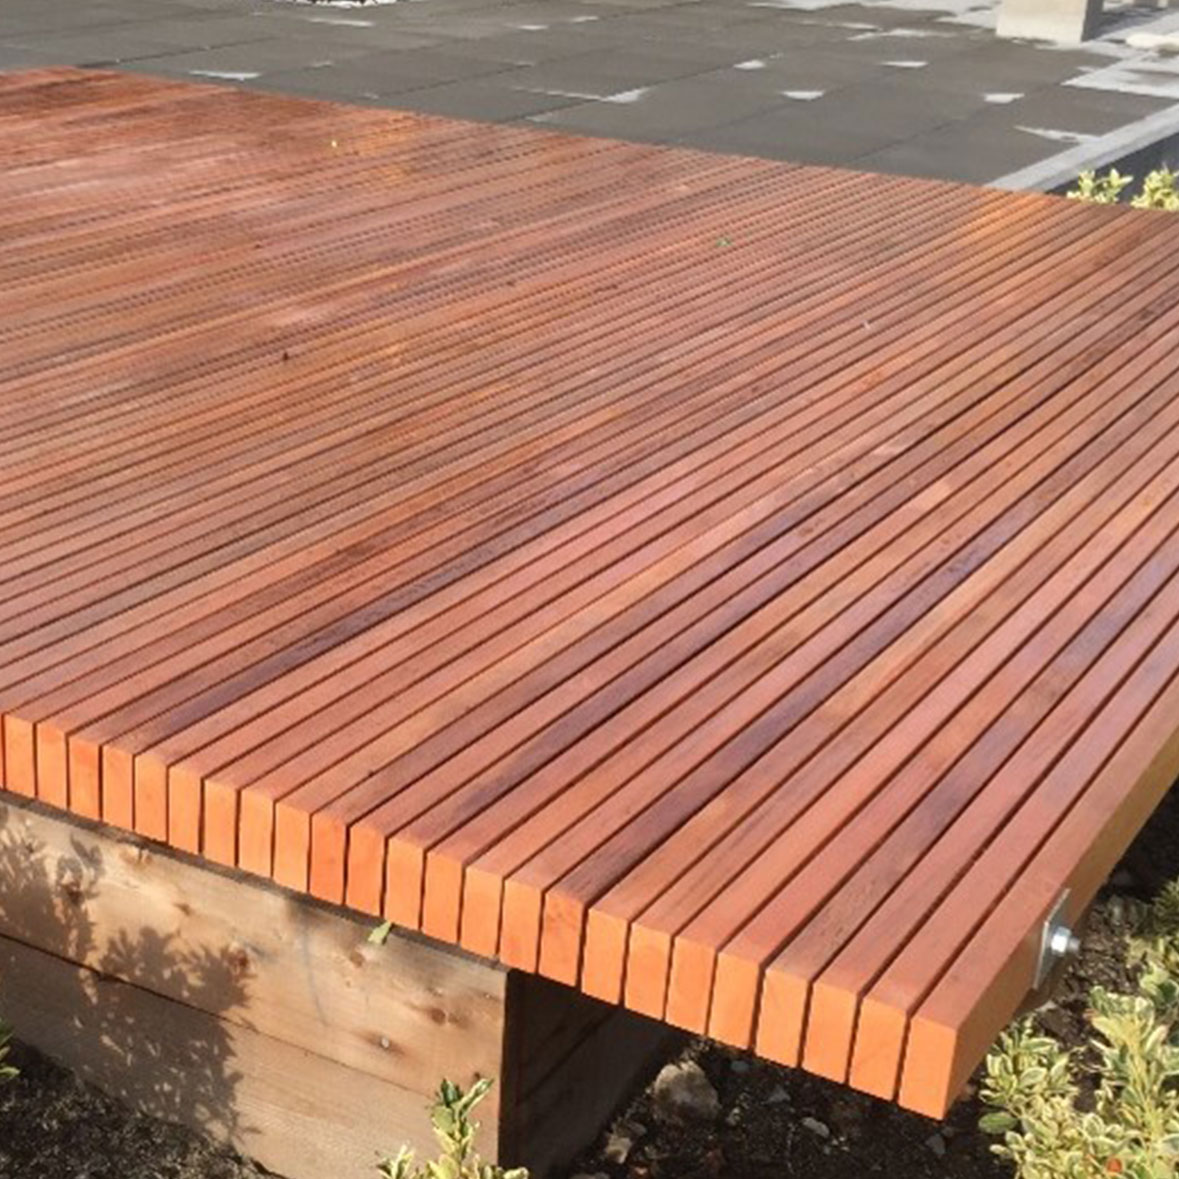 clear decking with limited knots